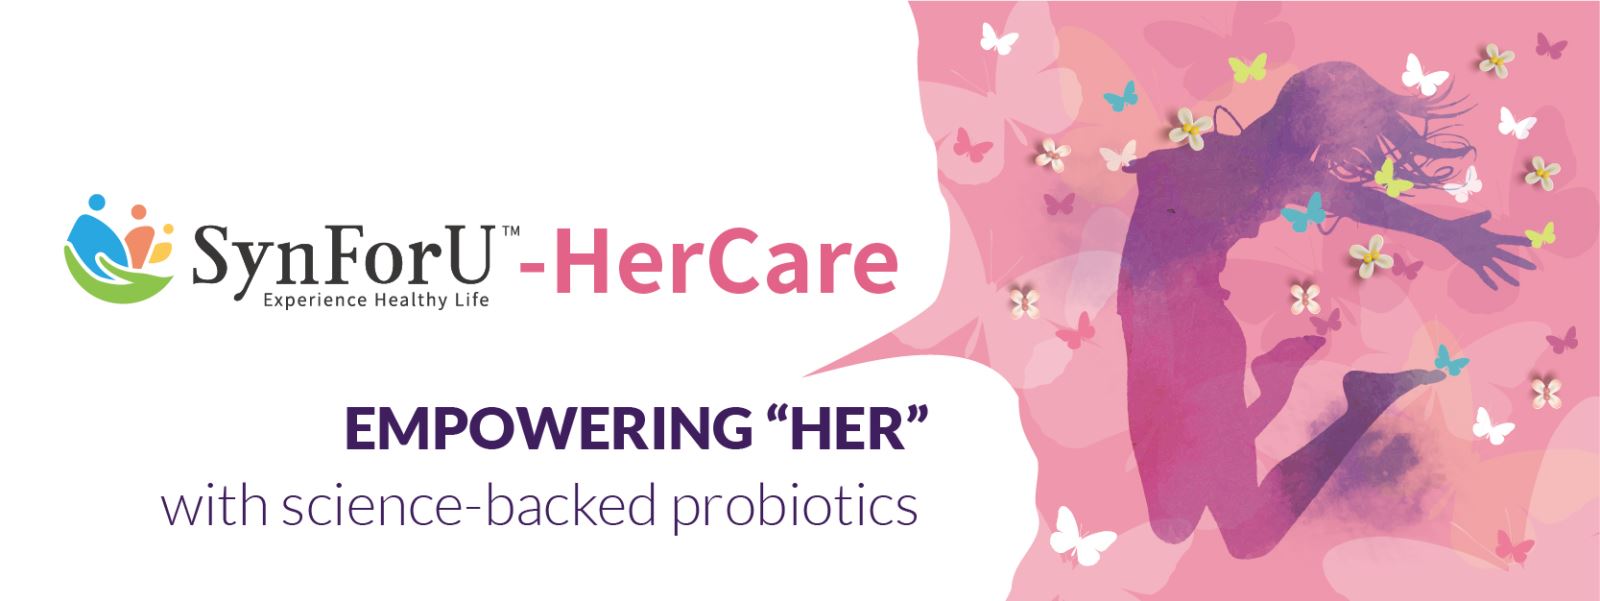 SynForU ™-HerCare: Empowering “HER” with science-backed probiotics